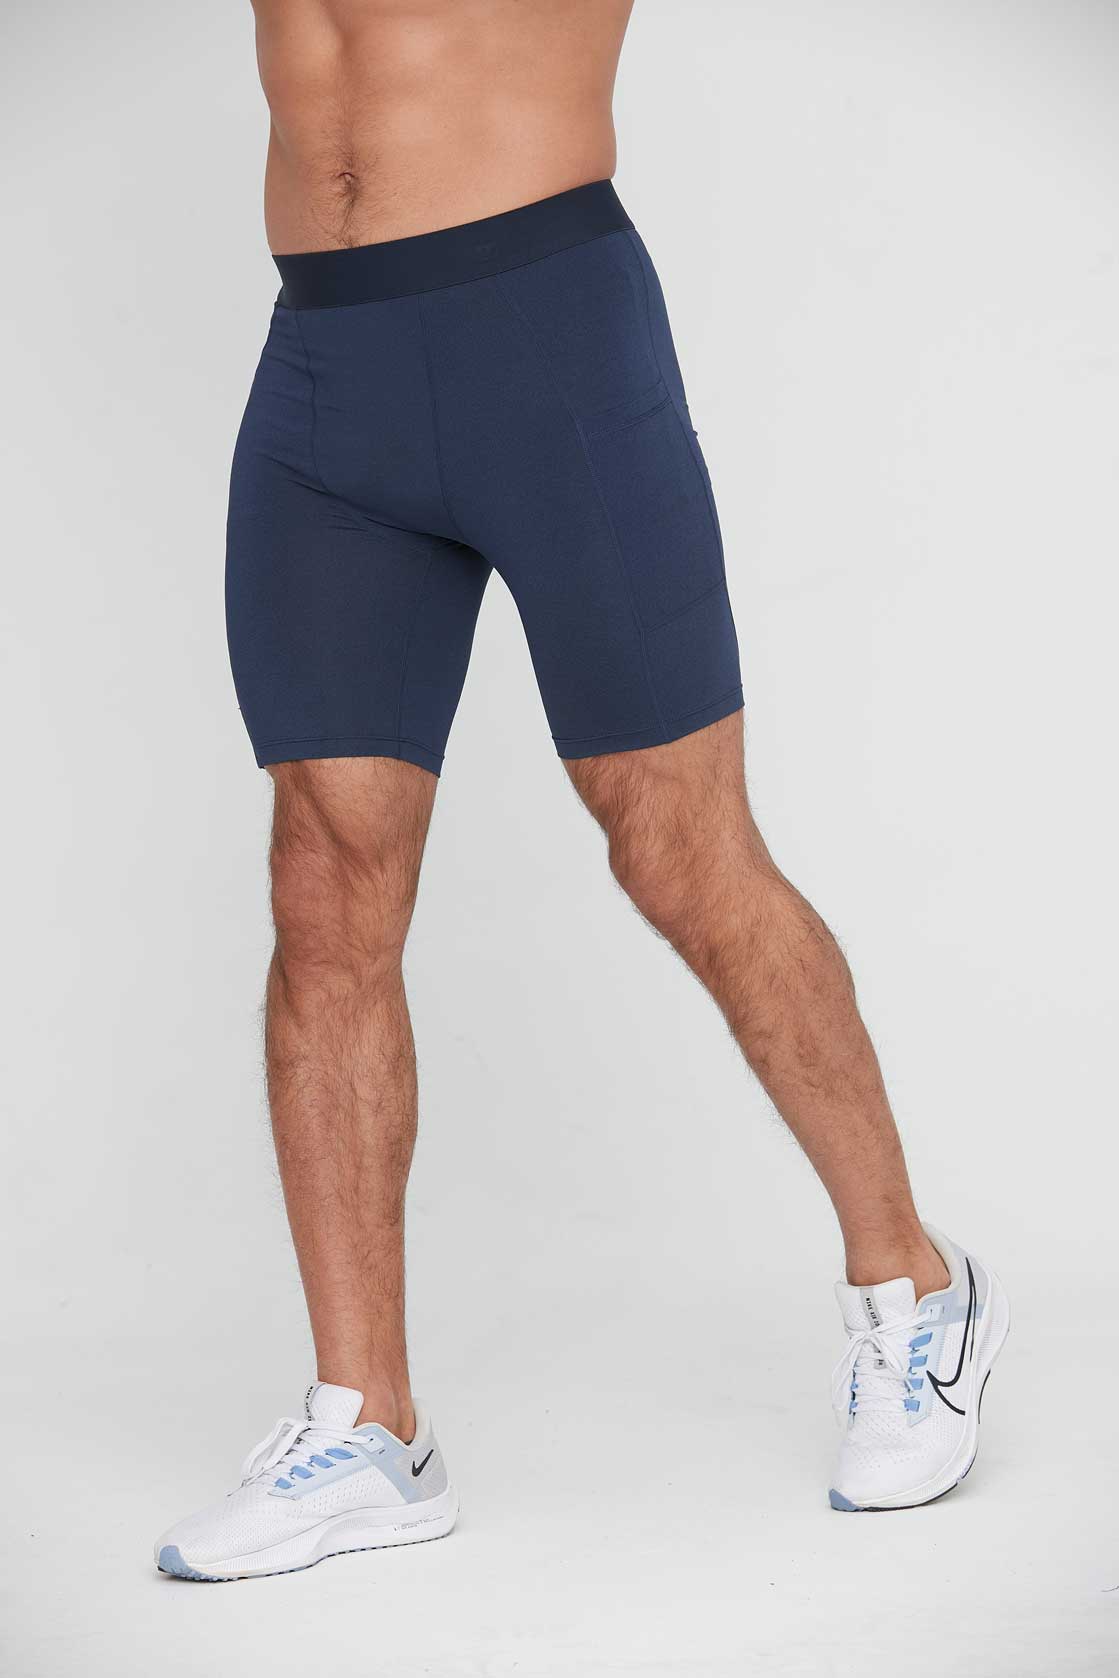 Men's Quick-Dry Compression Capri Cropped Pants for Basketball, Running,  and Training